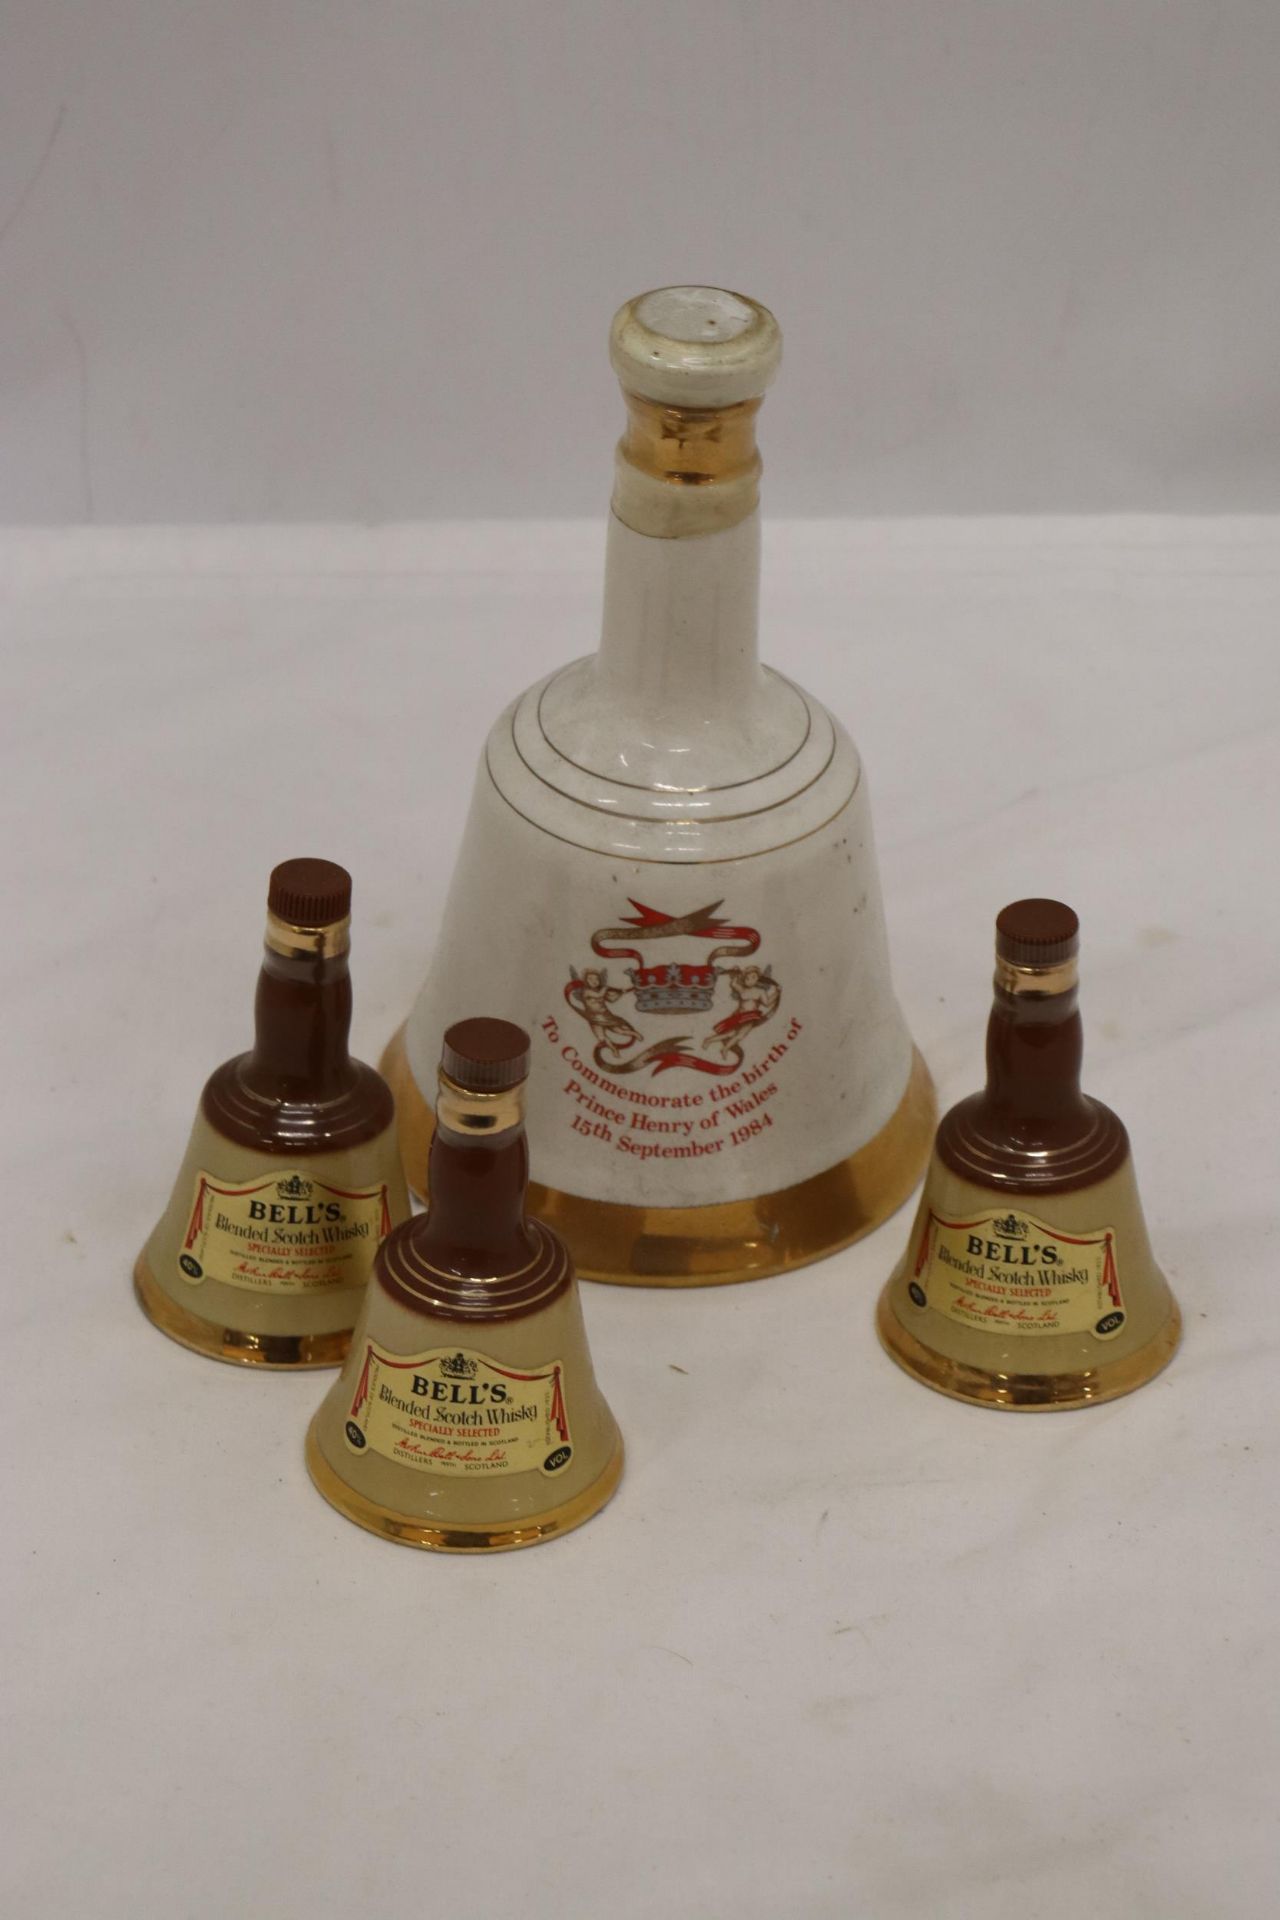 ONE LARGE AND THREE SMALL, BELL'S WHISKY CERAMIC DECANTERS